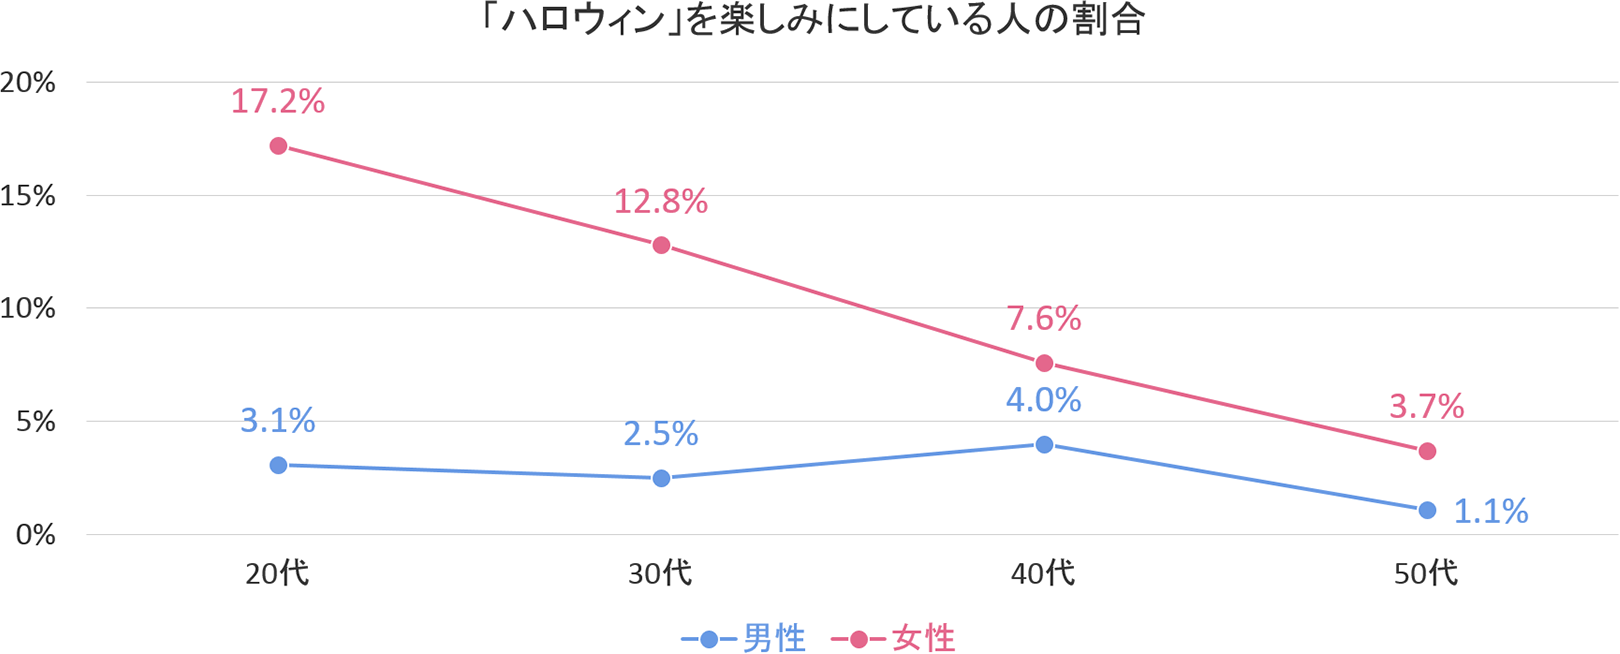 201601-02-fig-01.png